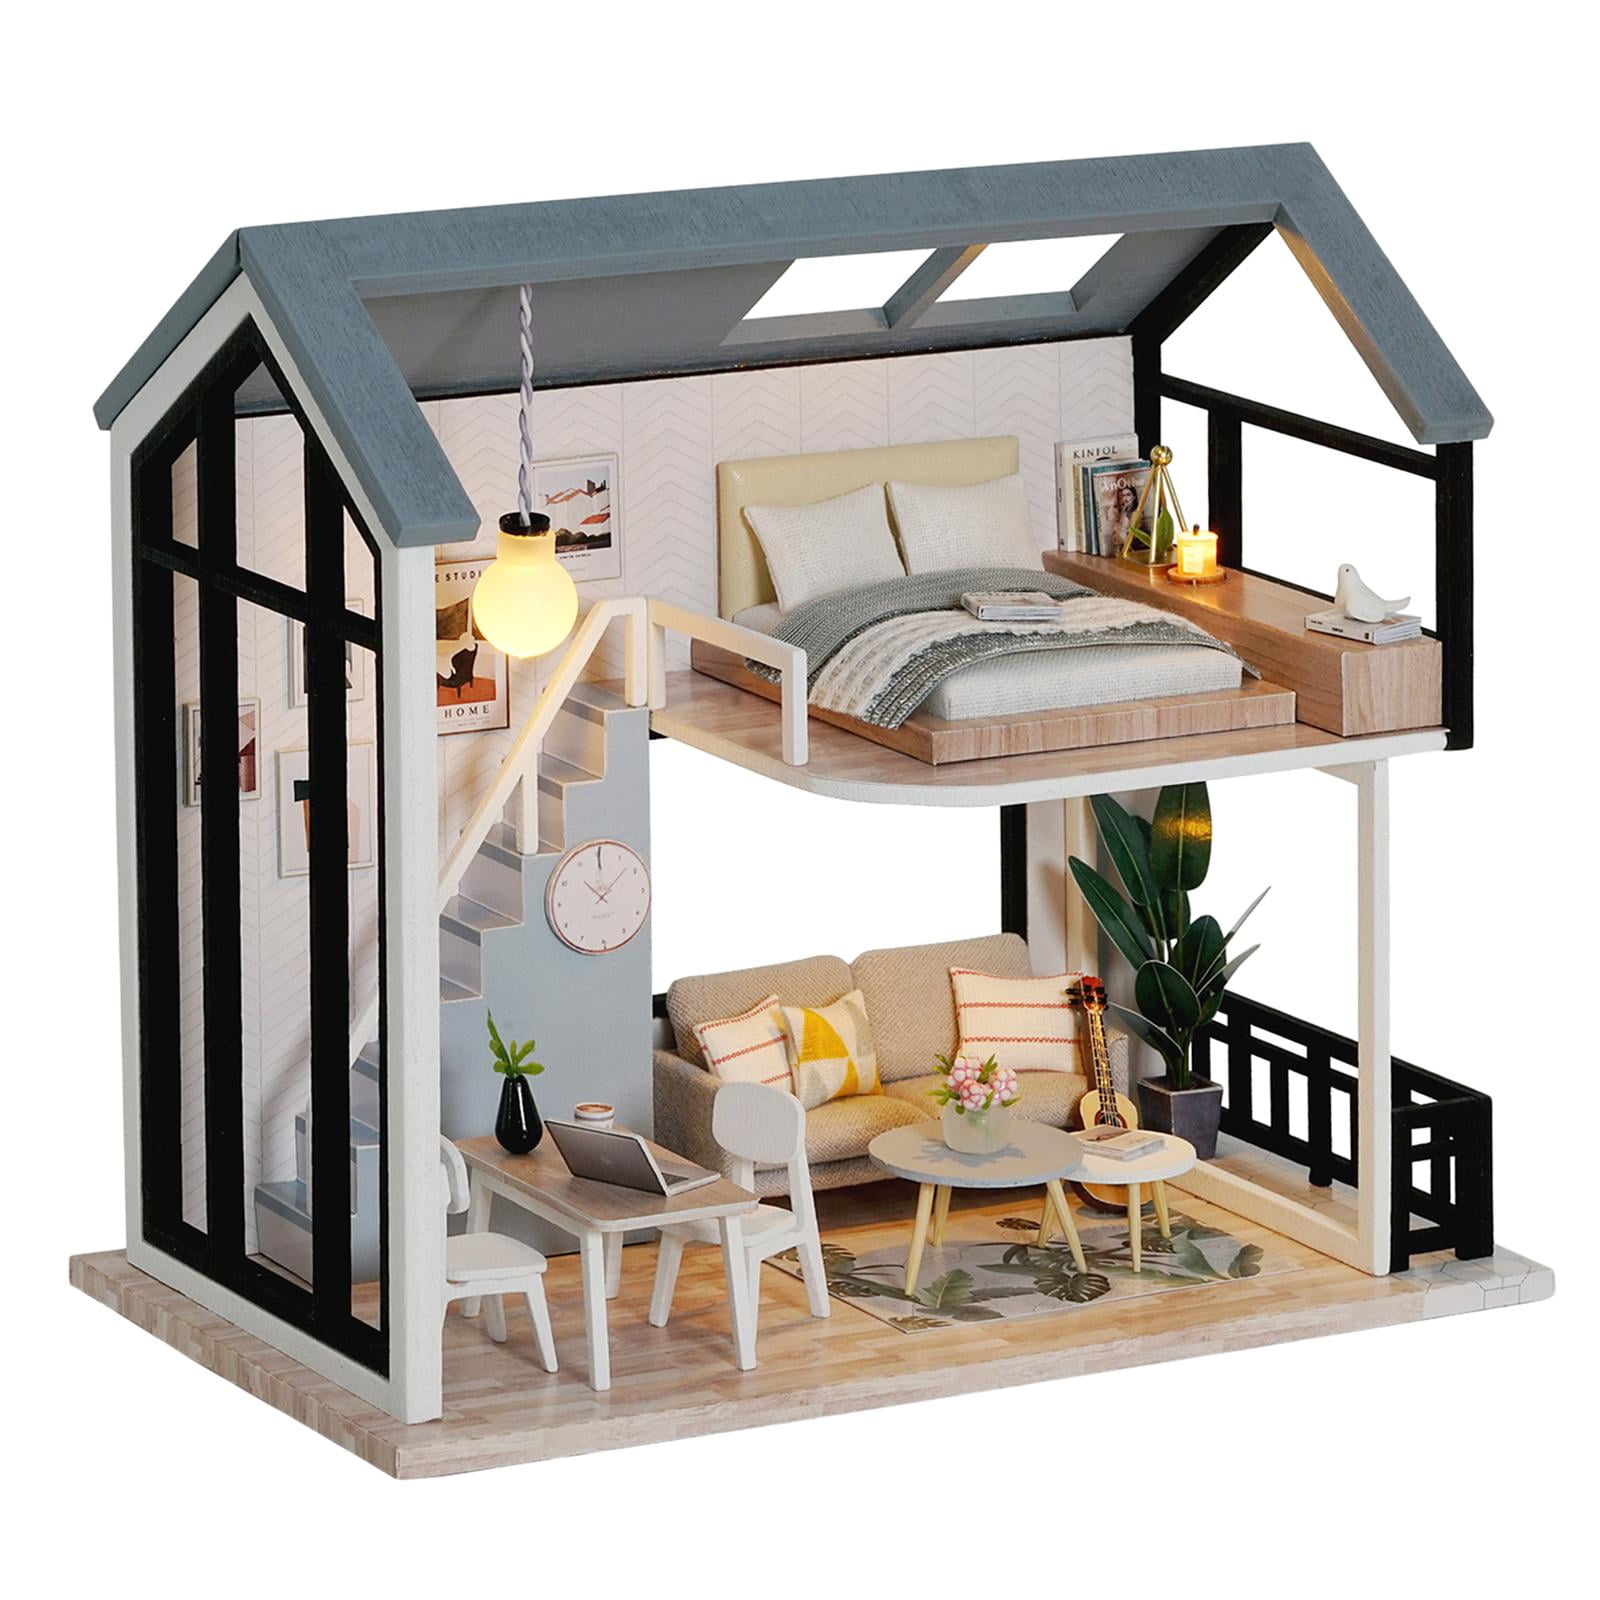 DIY Dollhouse Miniature Kit Christmas Music Wooden Doll House Room with LED Lights and Craft Furniture Sam Bookstore Educational Assembled Model Gift for Girls and Boys 